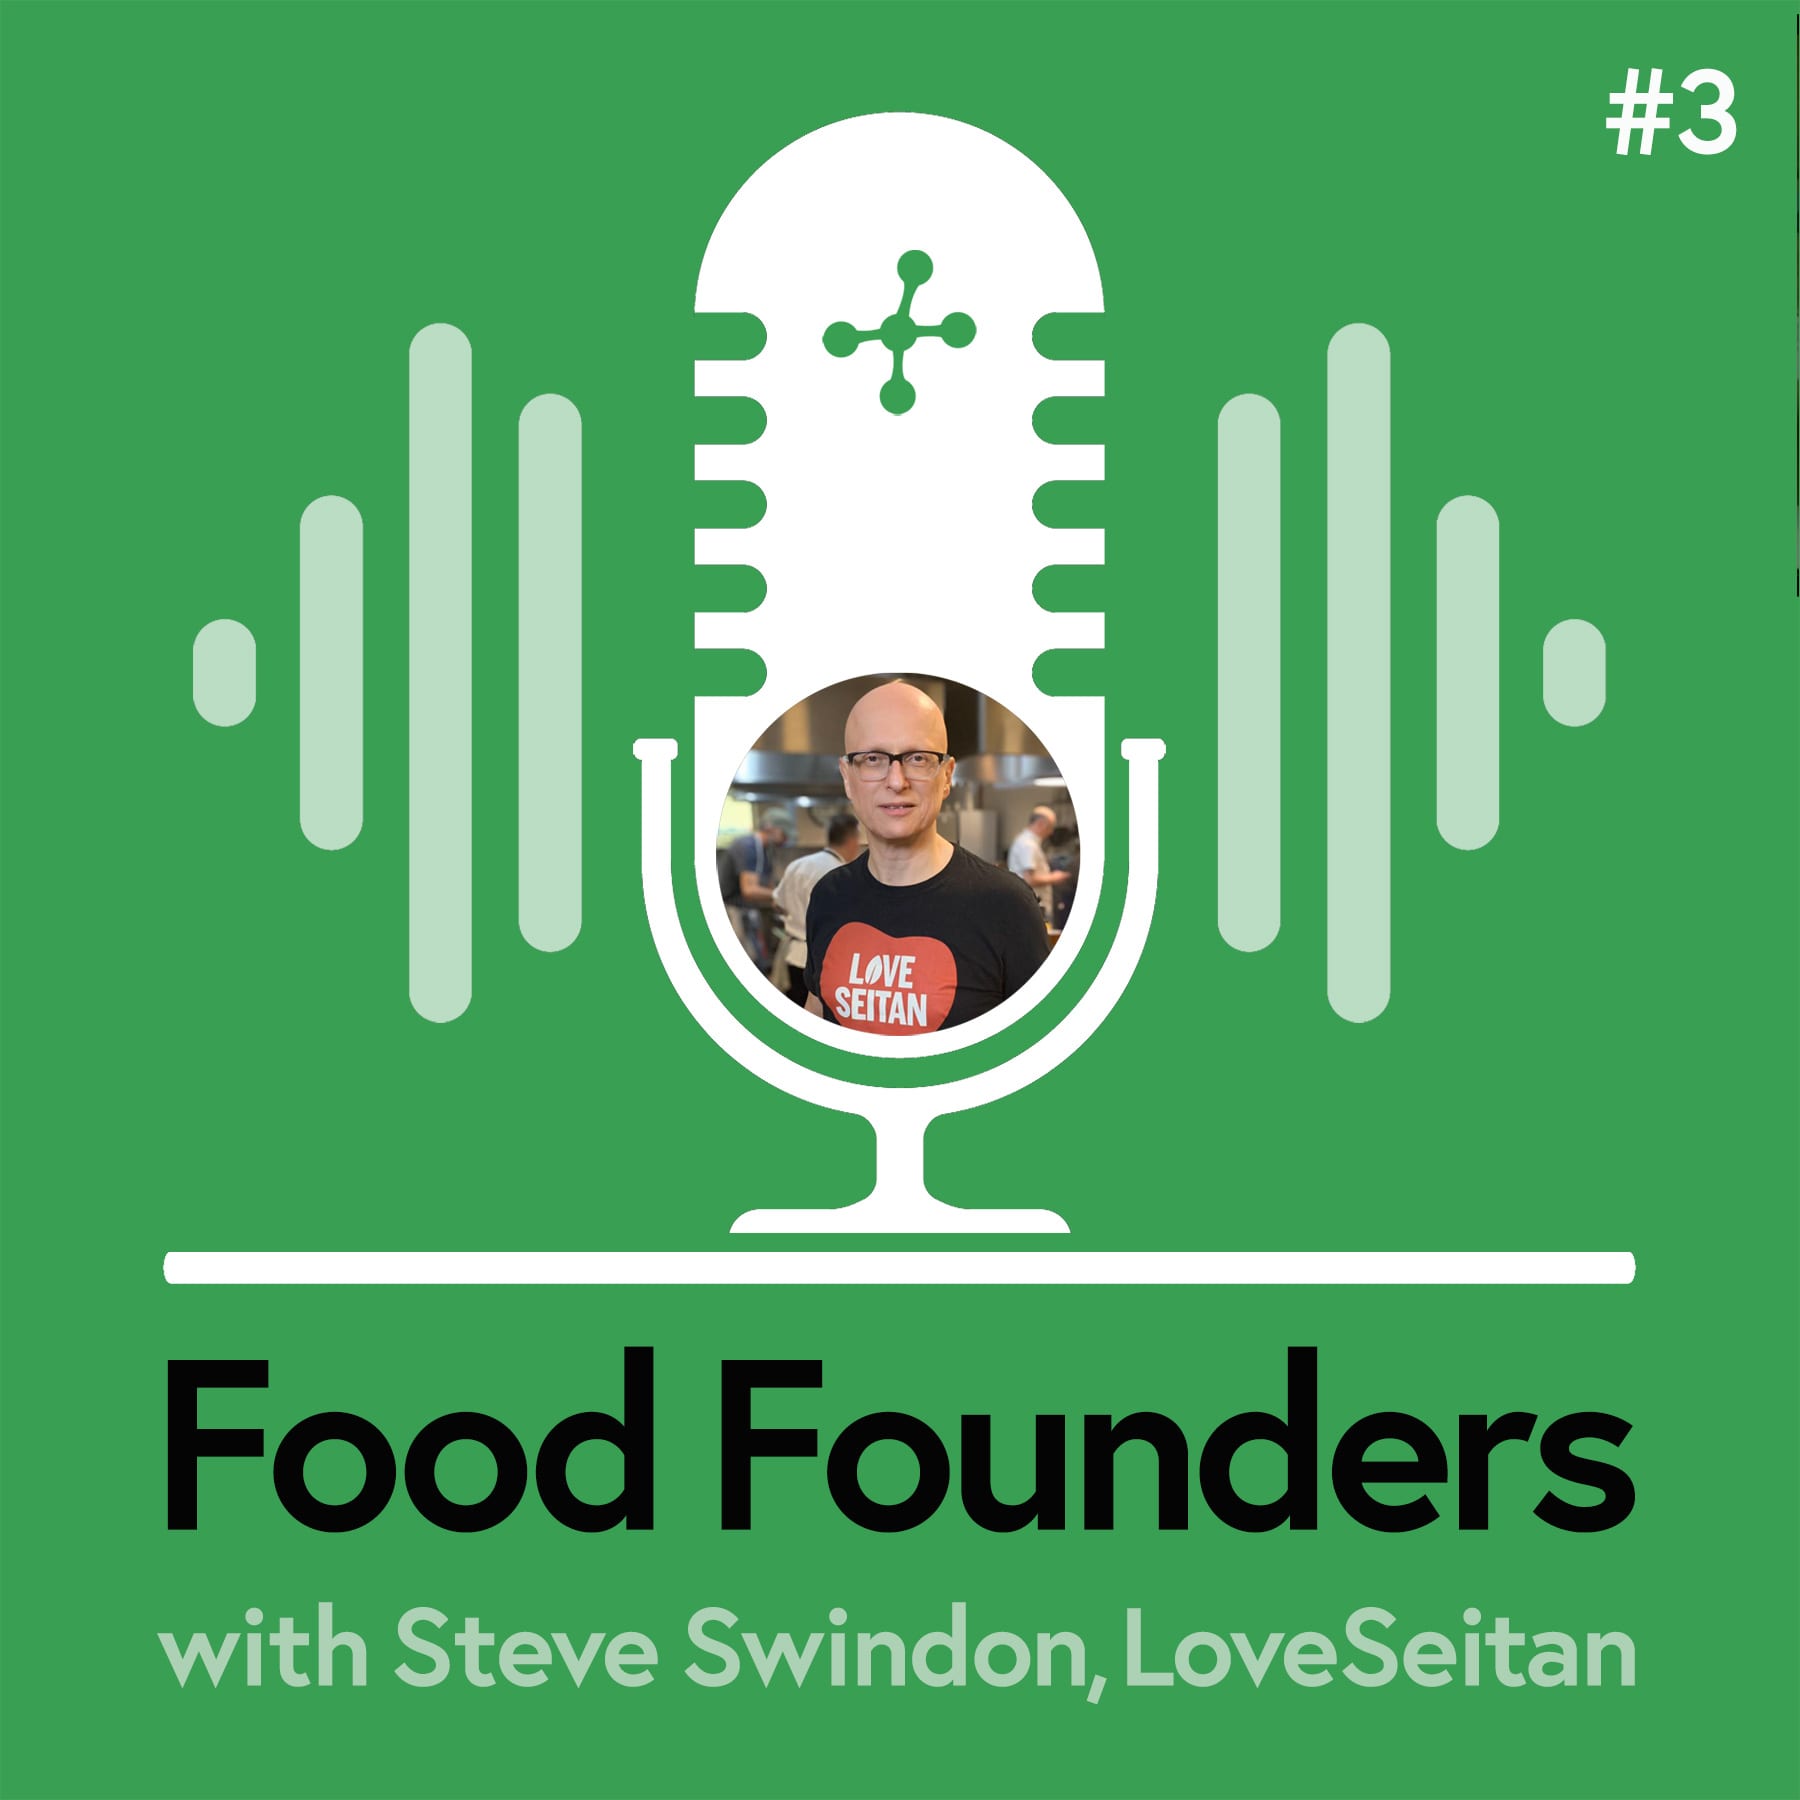 Vegan products that blow people's minds - with Steve Swindon of LoveSeitan